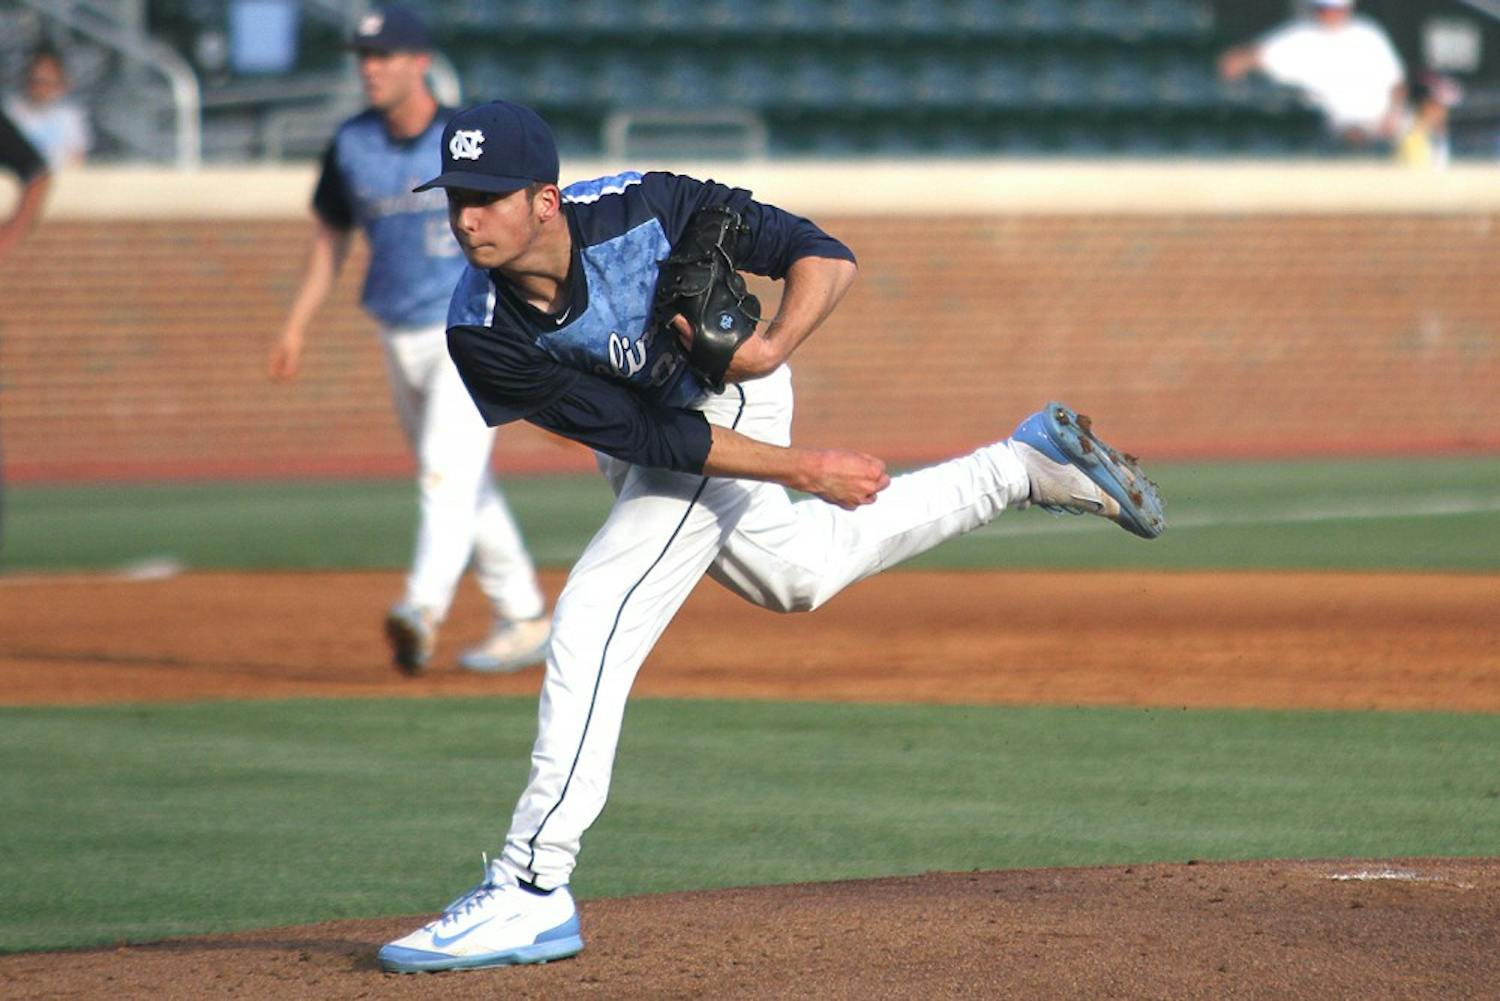 pitcher Zac Gallen (23) of the North Carolina Tar Heels during the